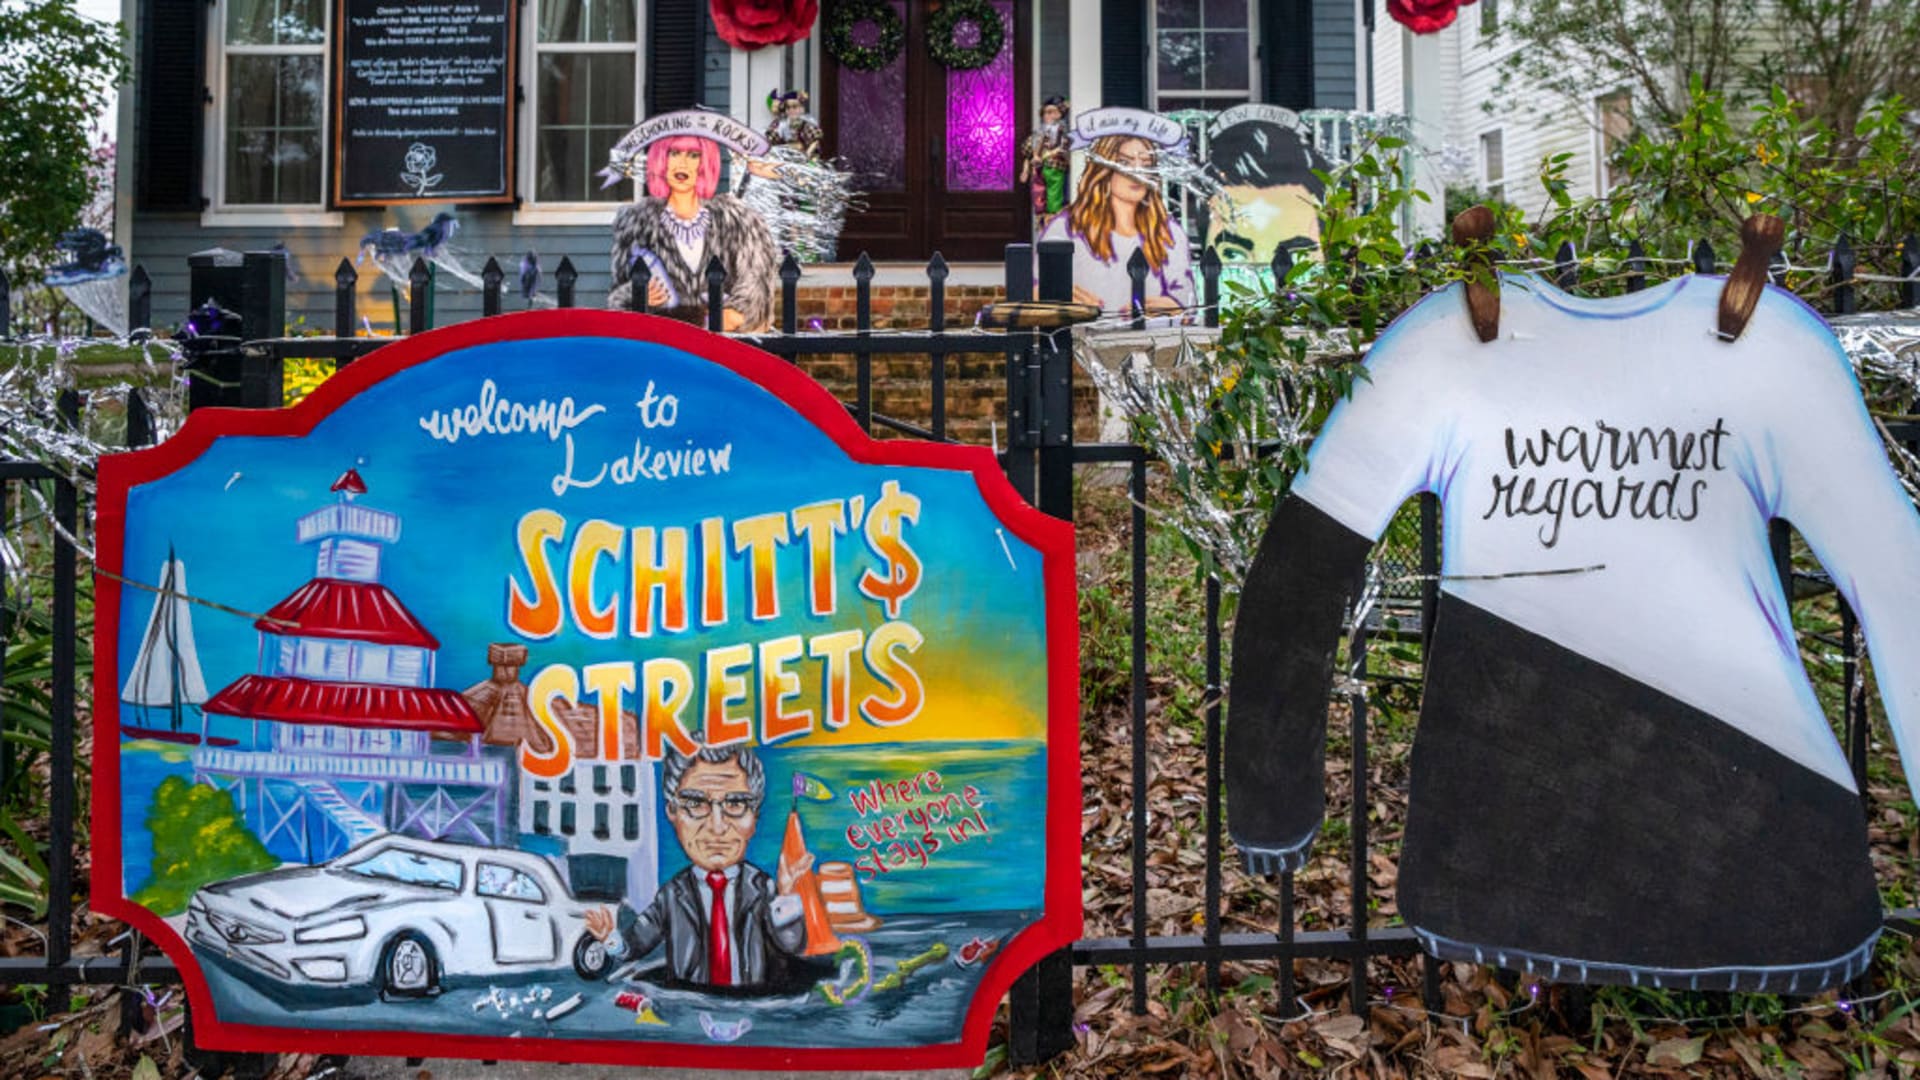 A home in Lakeview is decorated with a Schitt's Creek theme on February 15, 2021 in New Orleans, Louisiana.